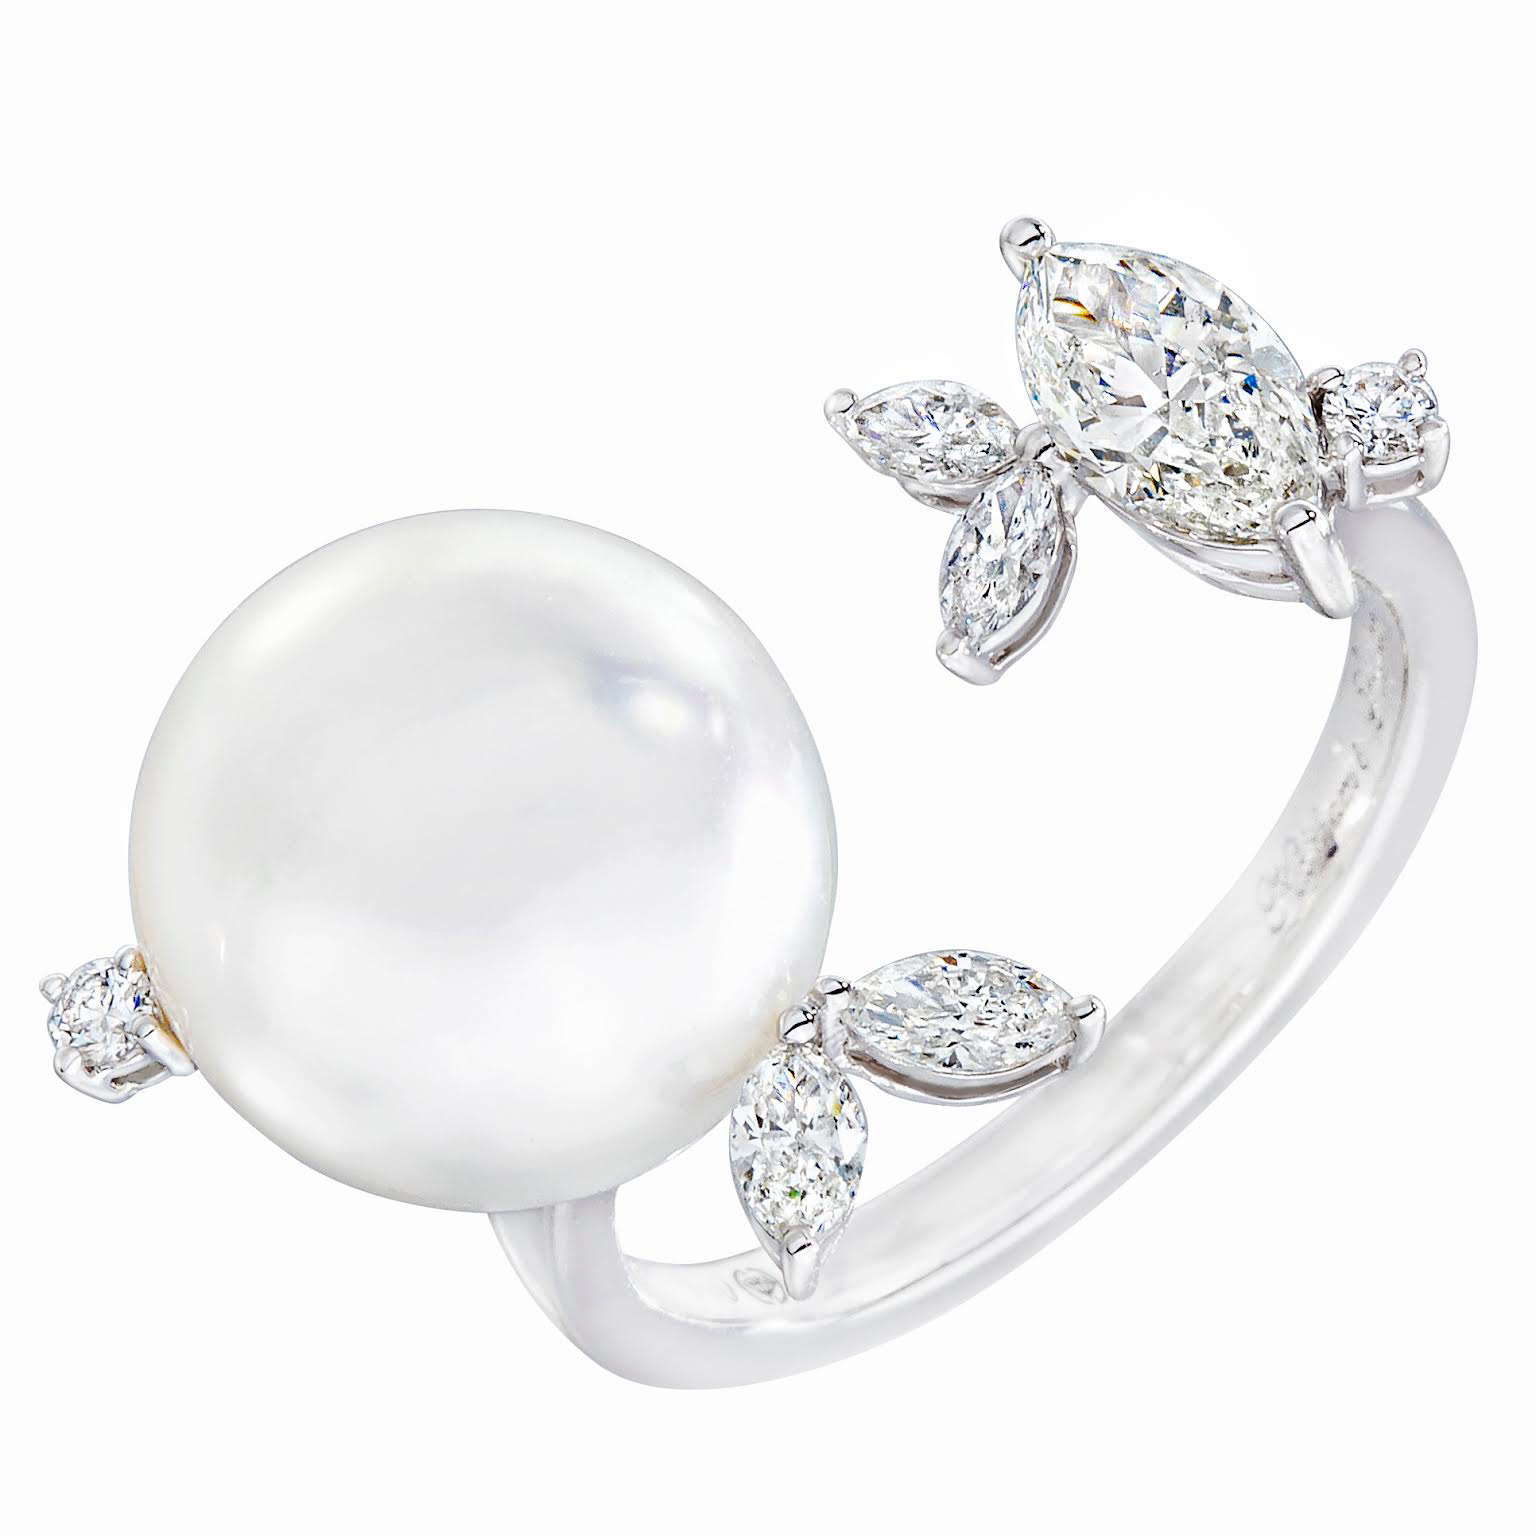 CLASSIC PEARL GARDENIA RING BY KALTHAM’S PAVILION JEWELLERY